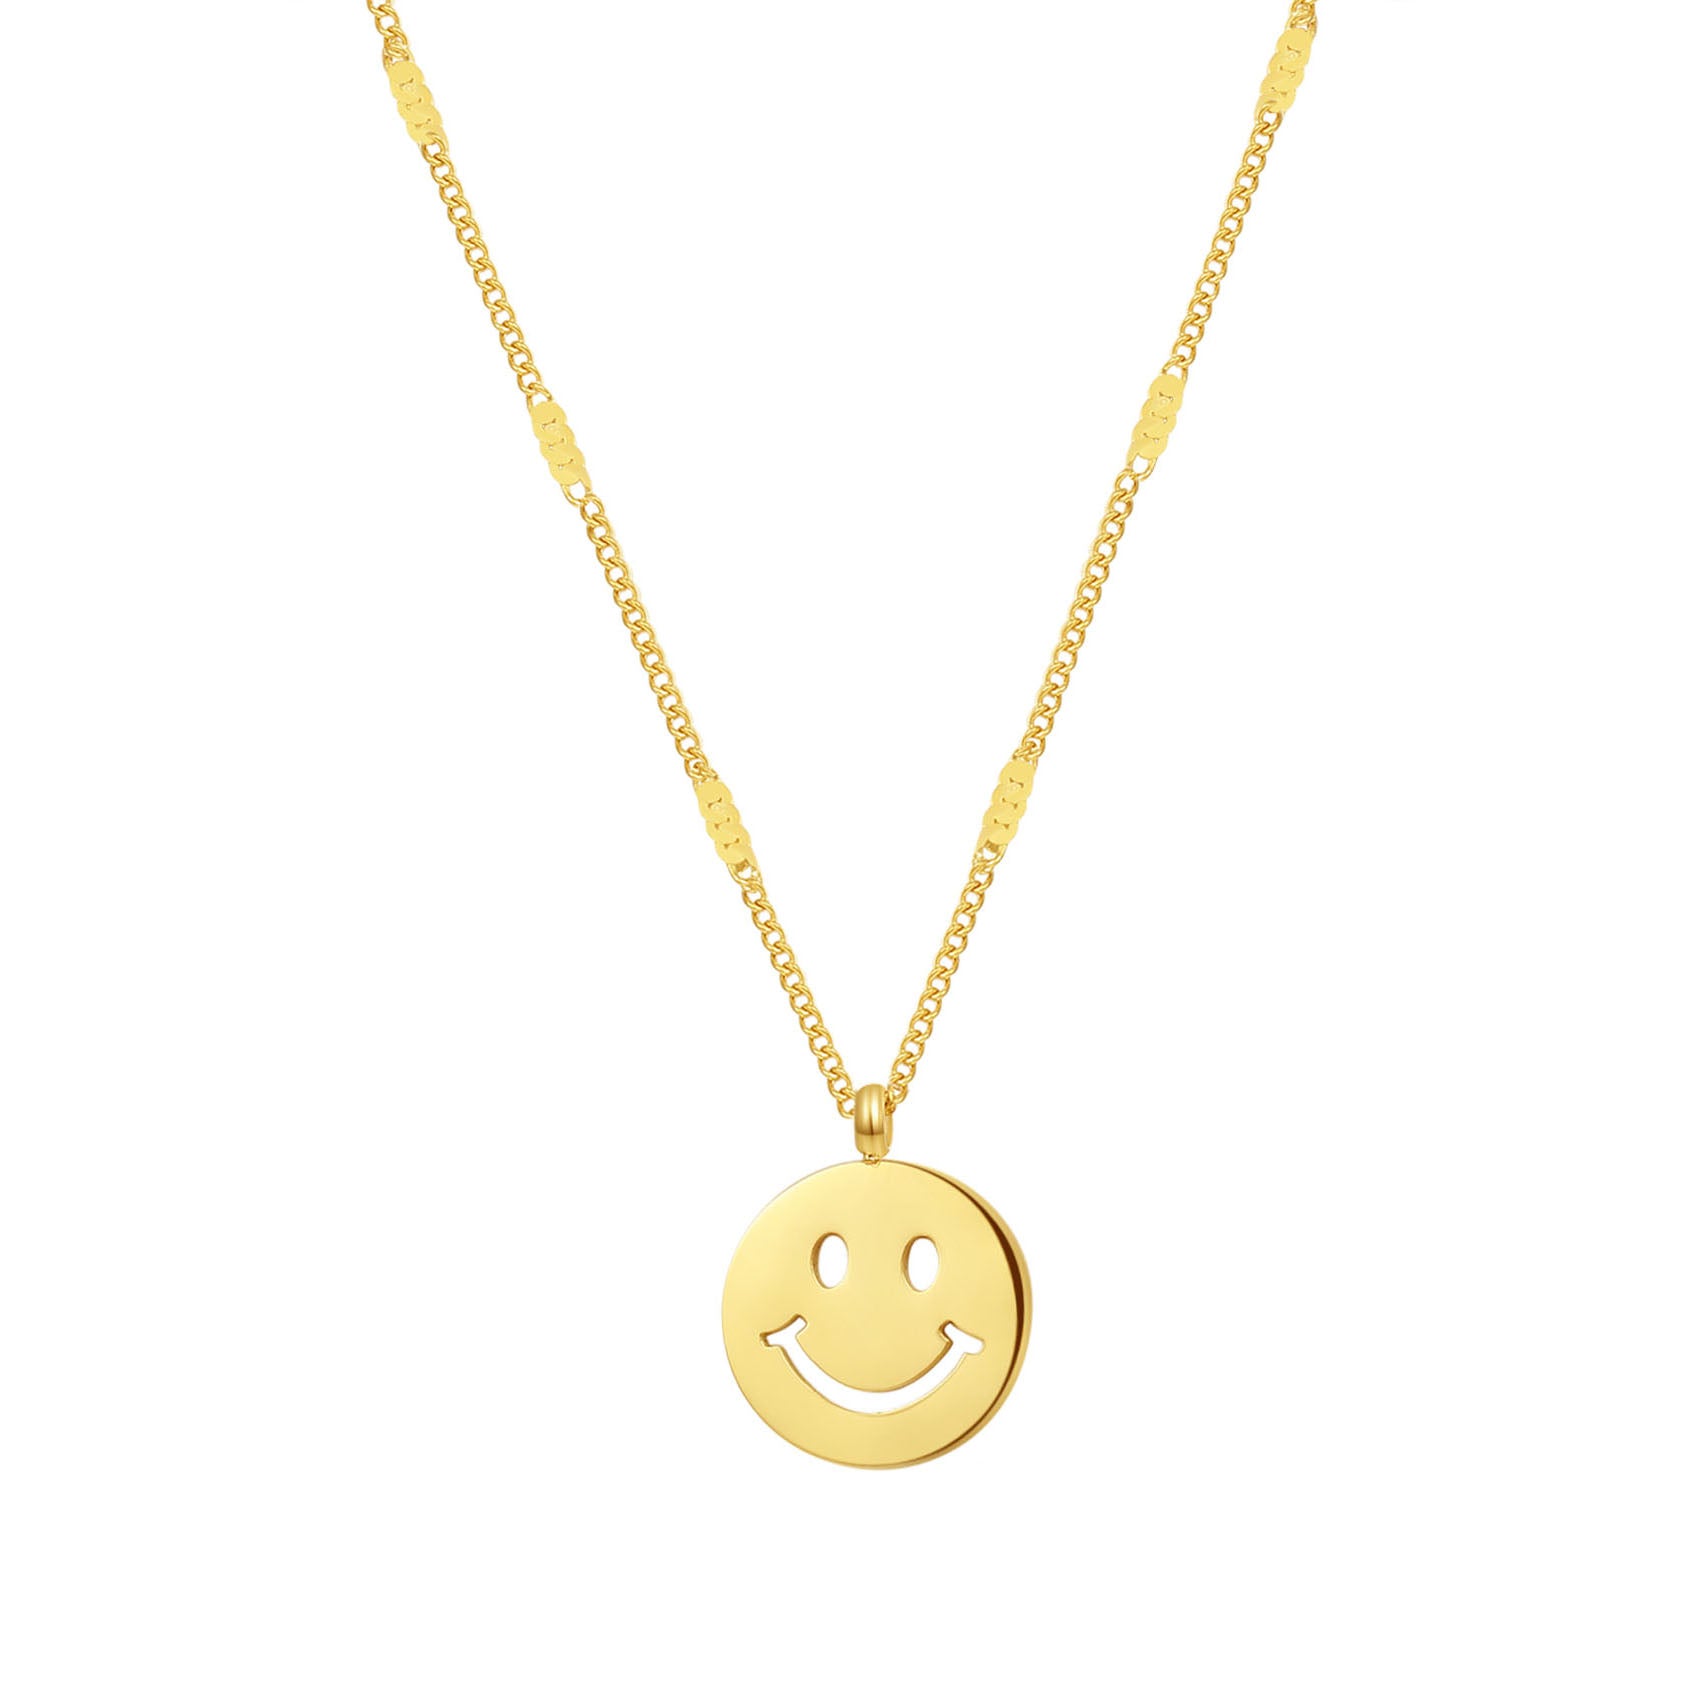 Kette Smiley Gesicht Anhänger Hey Sterlingsilber Gold Happiness – in